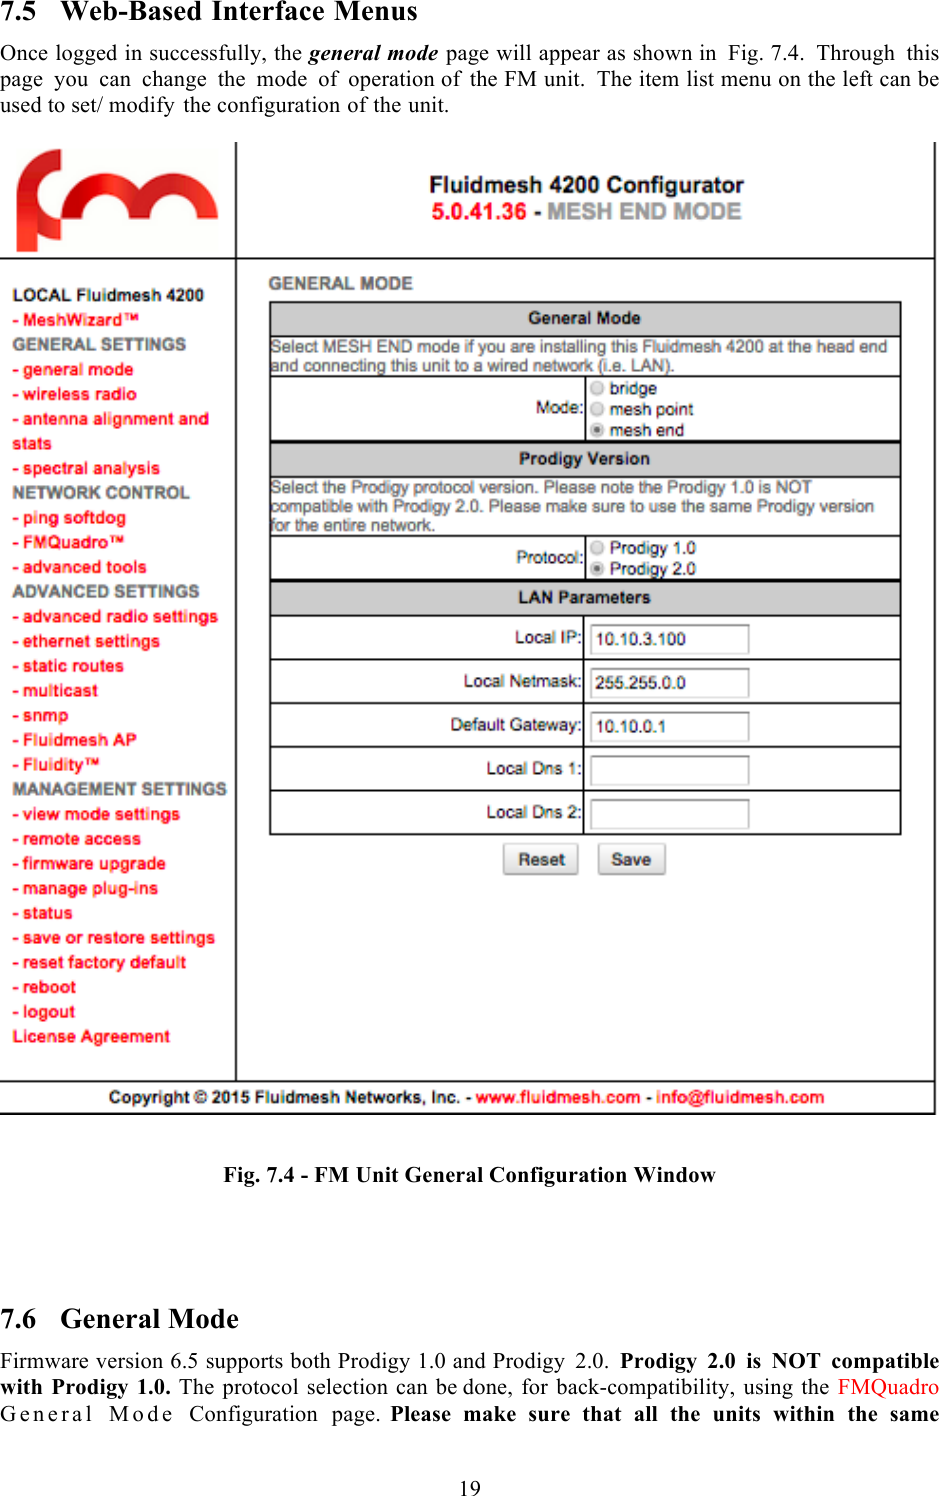  19  7.5 Web-Based Interface Menus Once logged in successfully, the general mode page will appear as shown in Fig. 7.4.  Through this page you can change the mode of operation of the FM unit. The item list menu on the left can be used to set/ modify the configuration of the unit.    Fig. 7.4 - FM Unit General Configuration Window    7.6 General Mode Firmware version 6.5 supports both Prodigy 1.0 and Prodigy 2.0.  Prodigy 2.0 is NOT compatible with Prodigy 1.0. The protocol selection can be done, for back-compatibility, using the FMQuadro General  Mode  Configuration page.  Please make sure that all the units within the same 